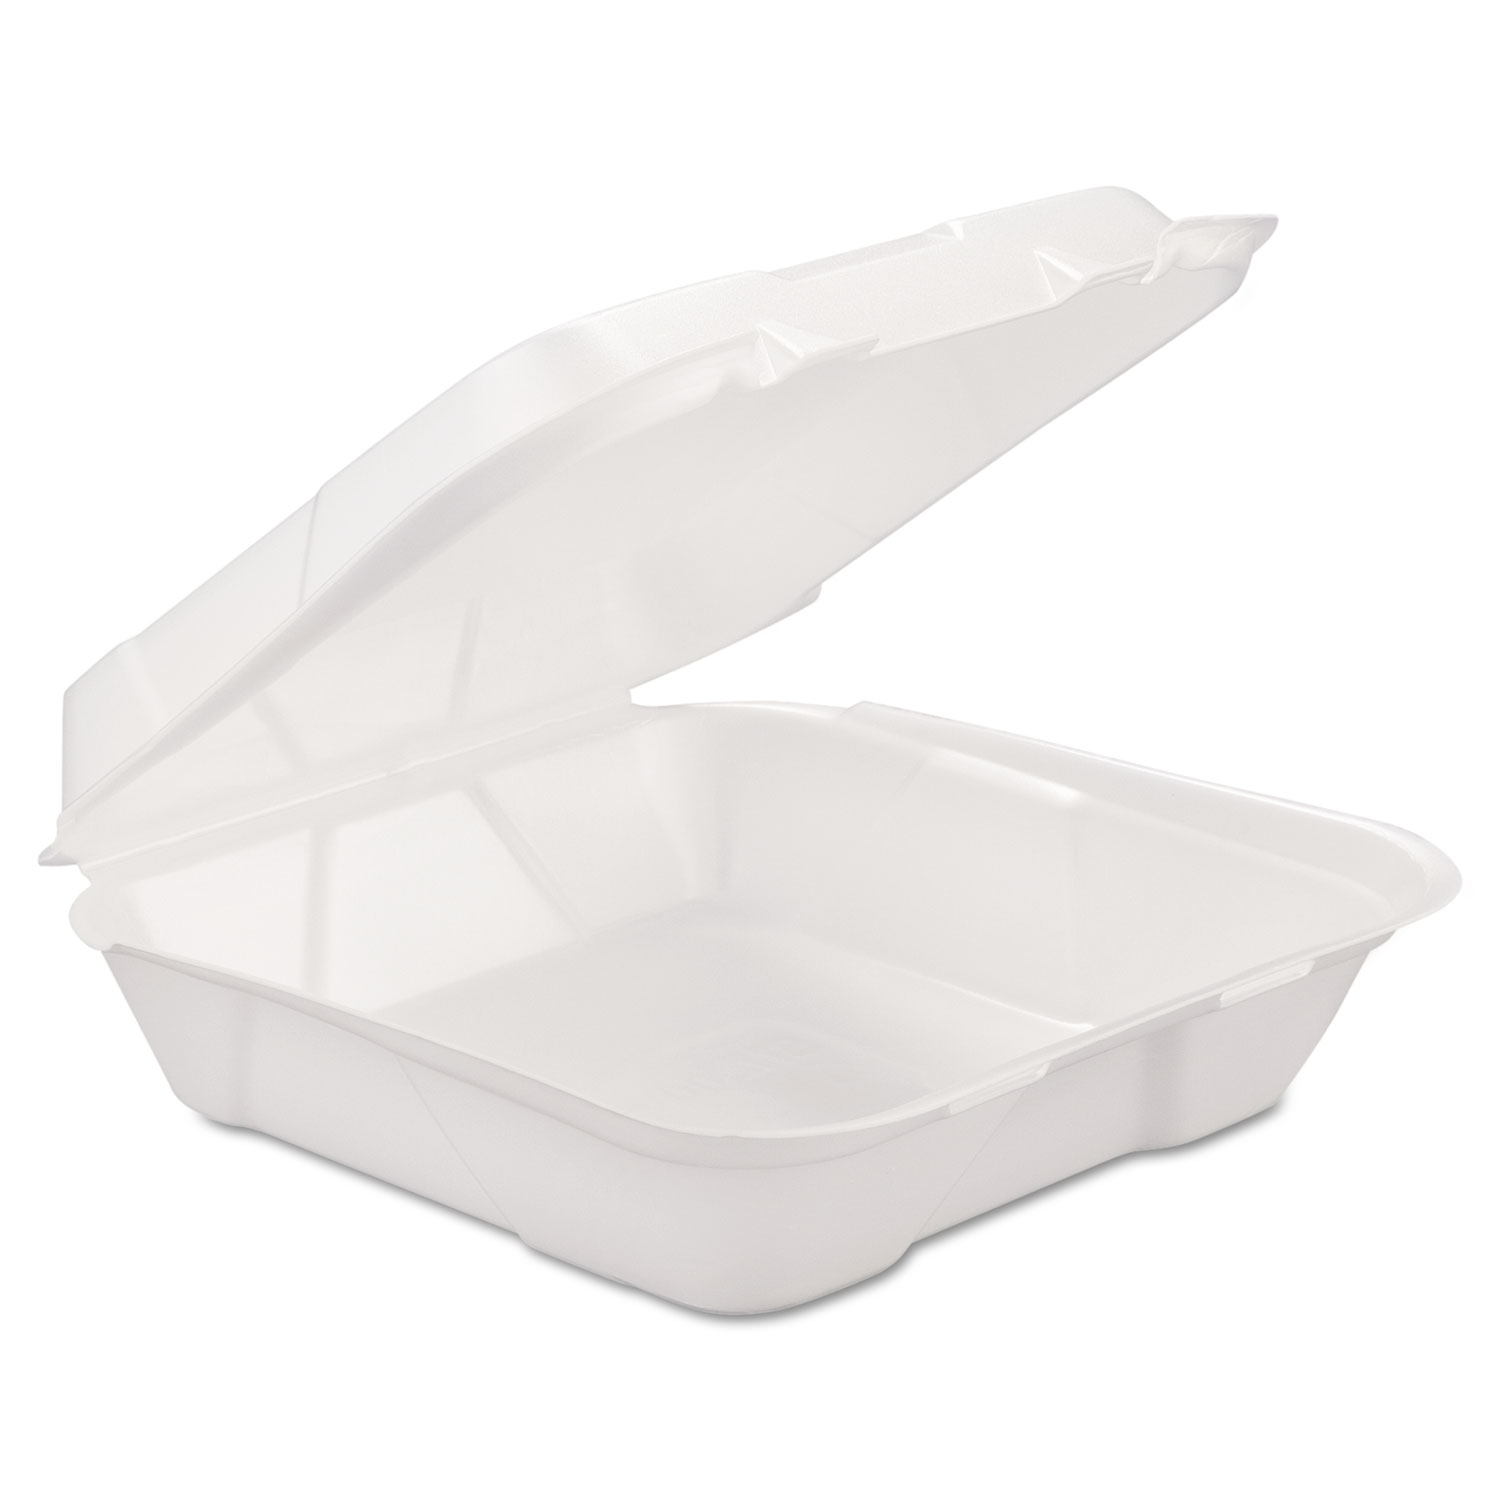 Foam Hinged Carryout Container, 1-Comp, White, 9 1/4 X 9 1/4 X 3, 200/Carton